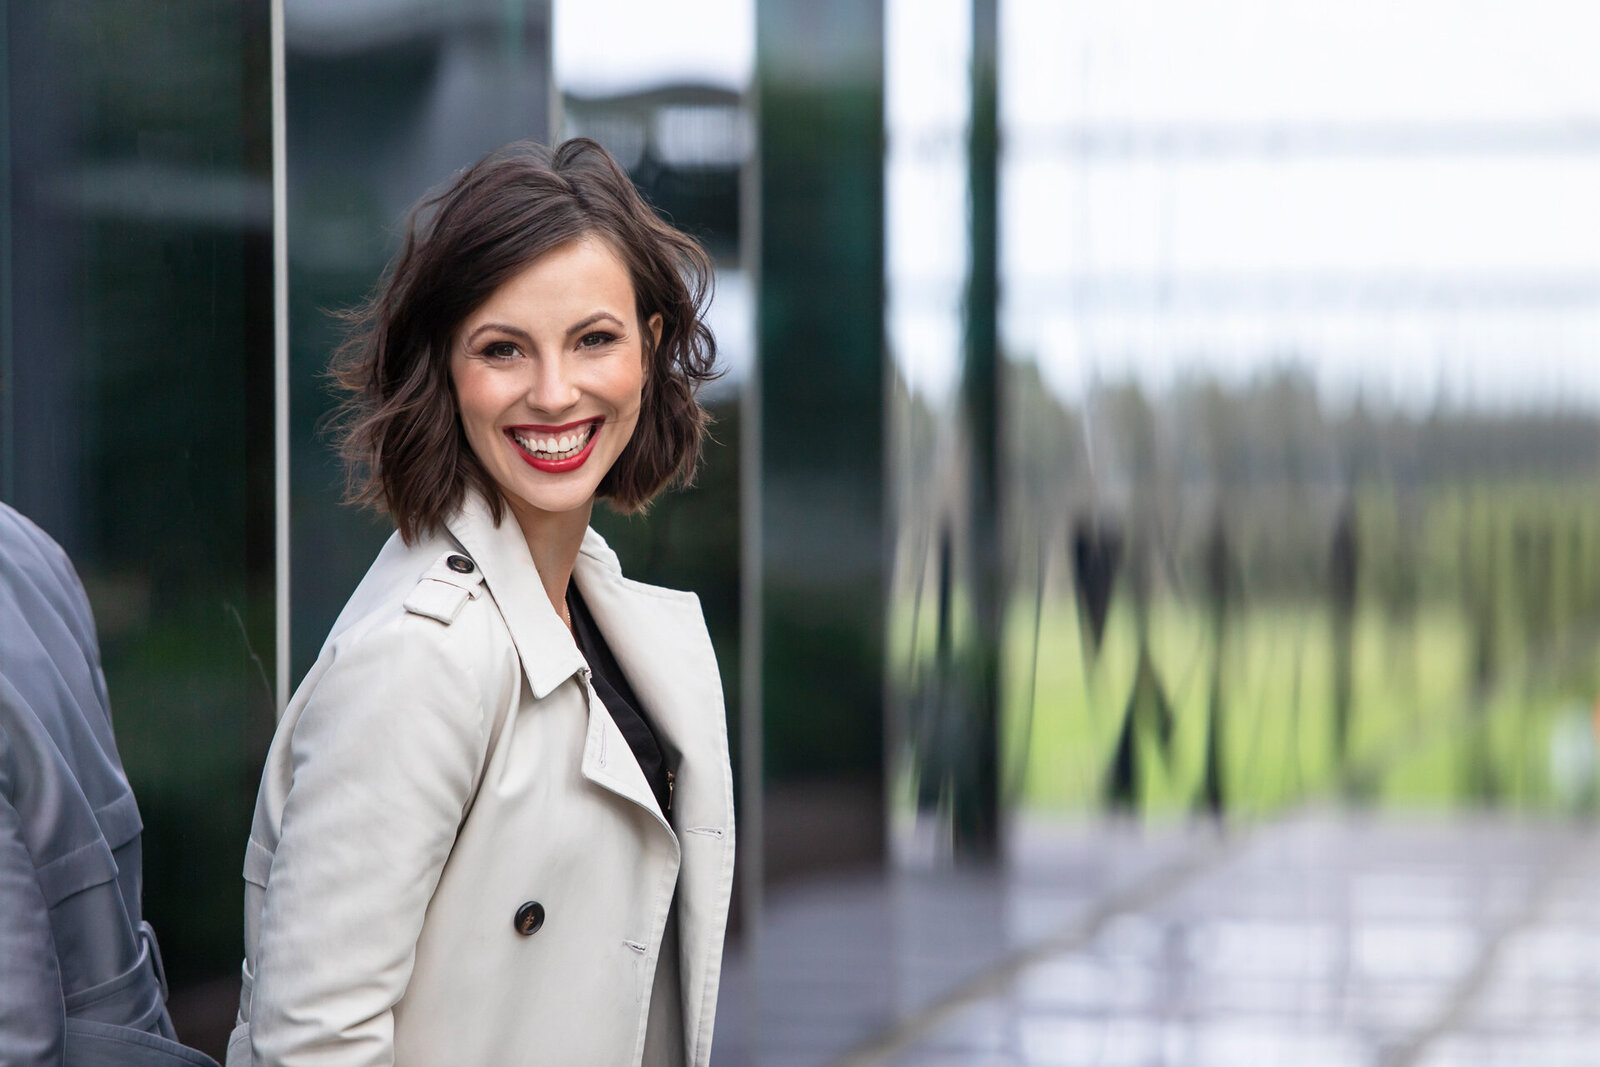 Business woman leaning against a glass wall of a building